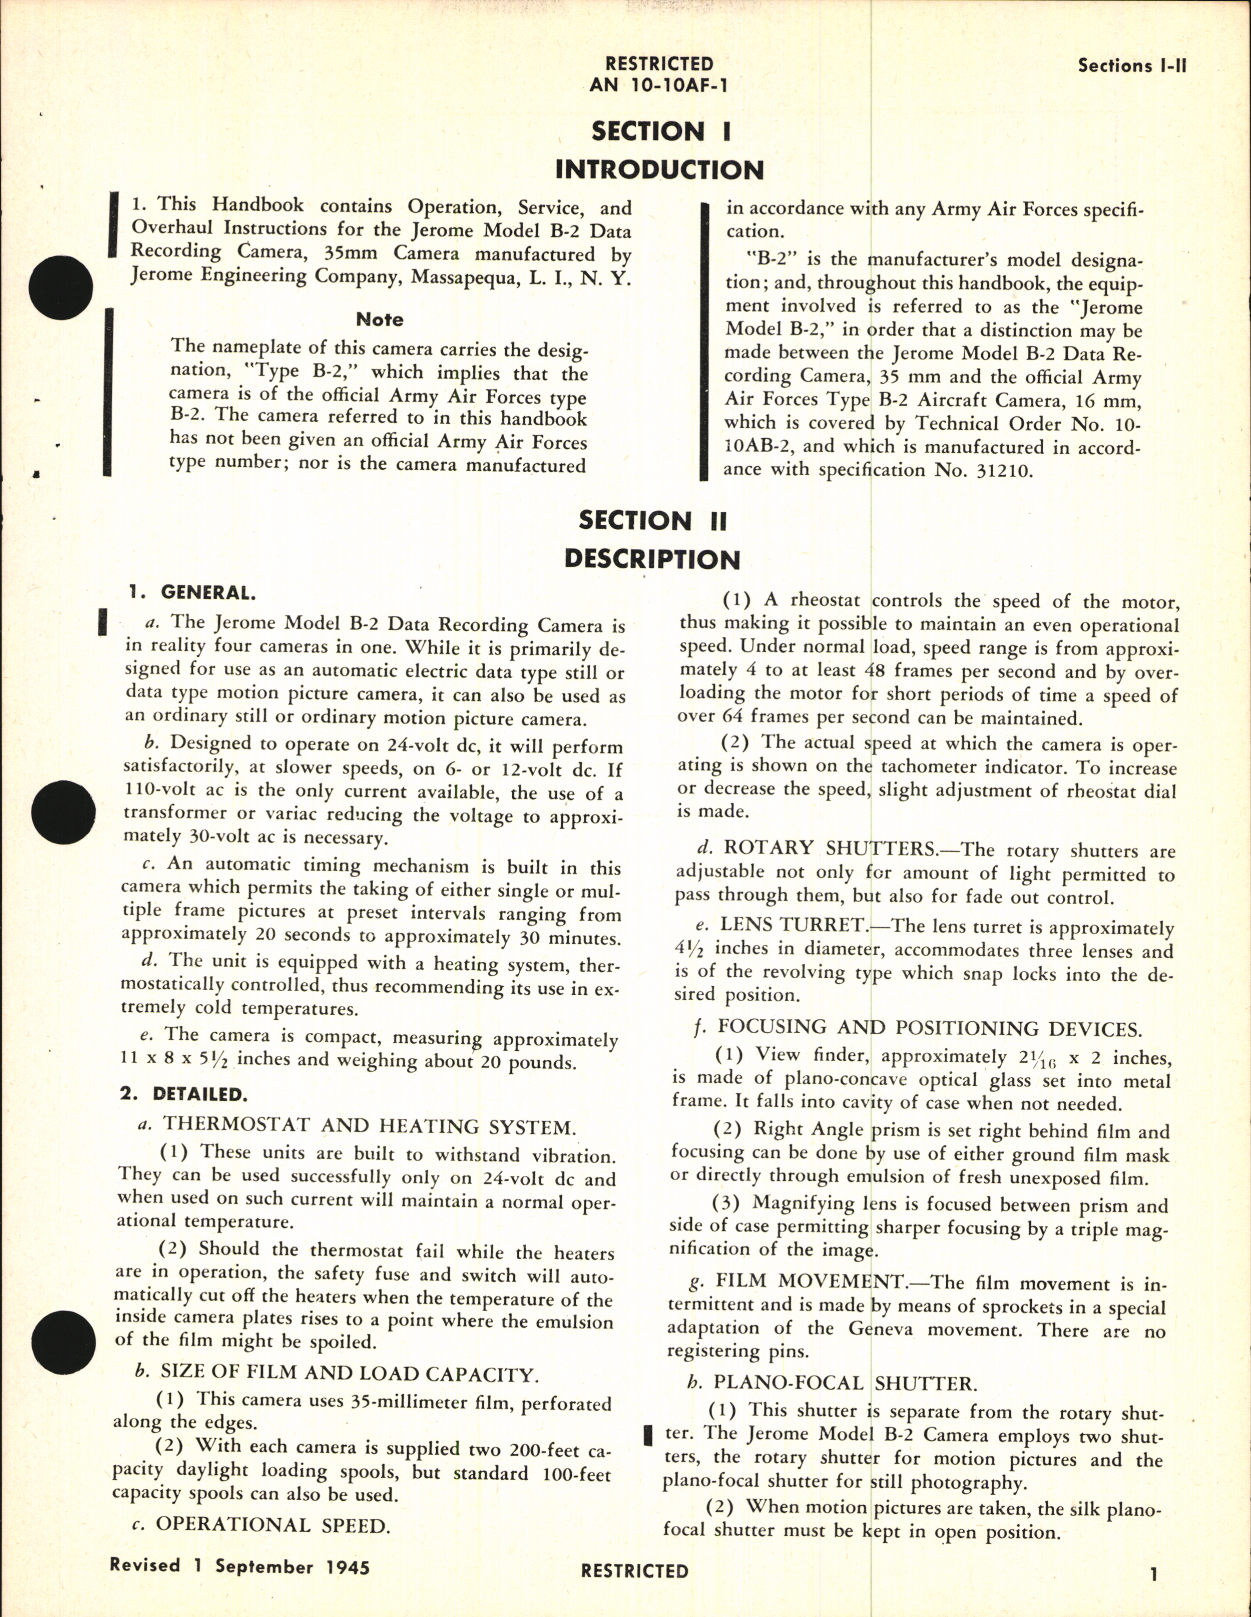 Sample page 5 from AirCorps Library document: Operation, Service, & Overhaul Instructions with Parts Catalog for Data Recording Camera Model B-2